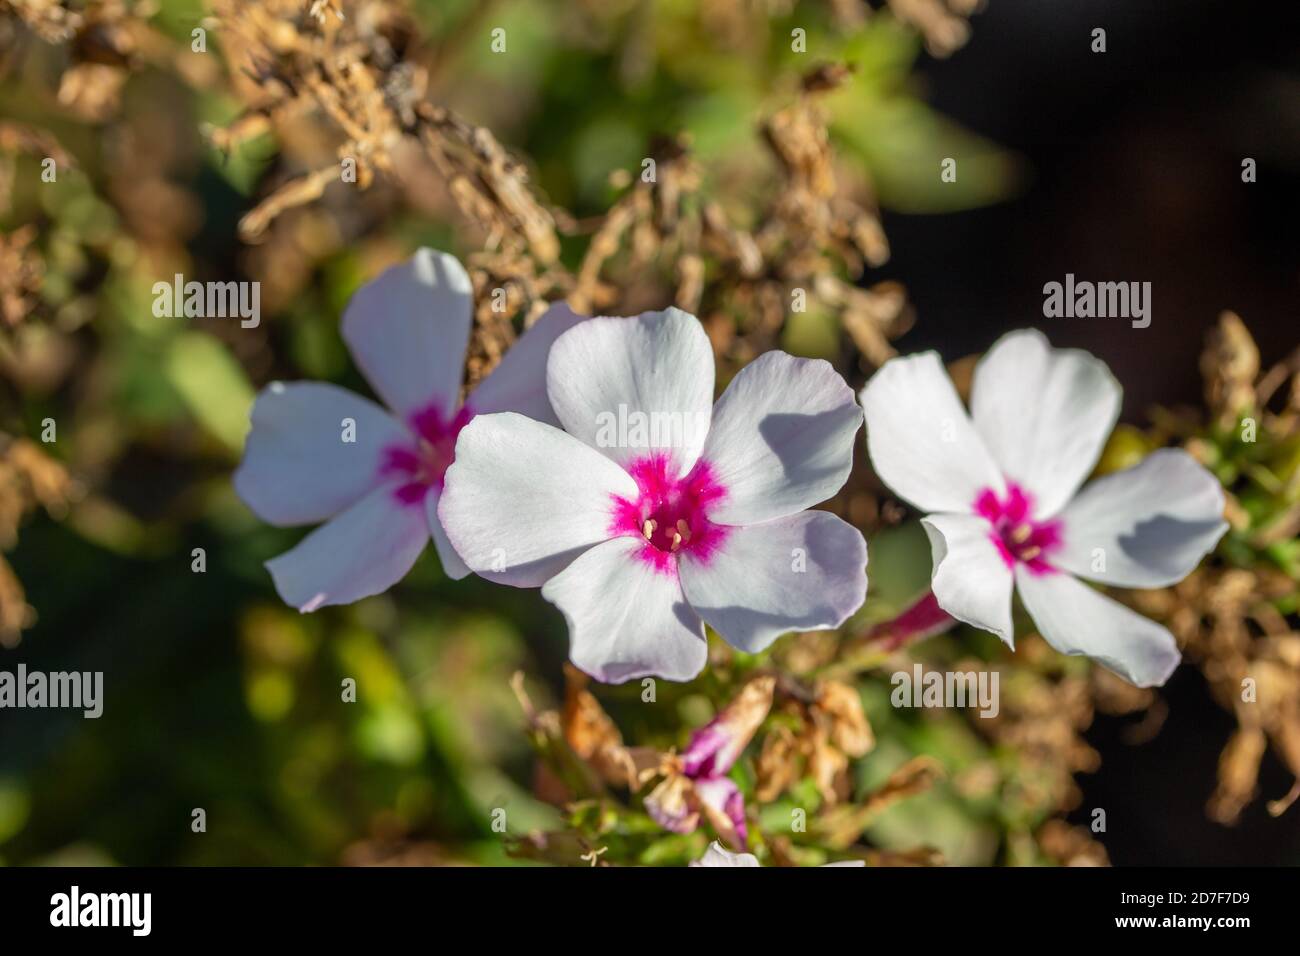 Macro top view of bright white and pink blooming flower blossoms with five petals, blooming in a sunny outdoor garden in late summer Stock Photo